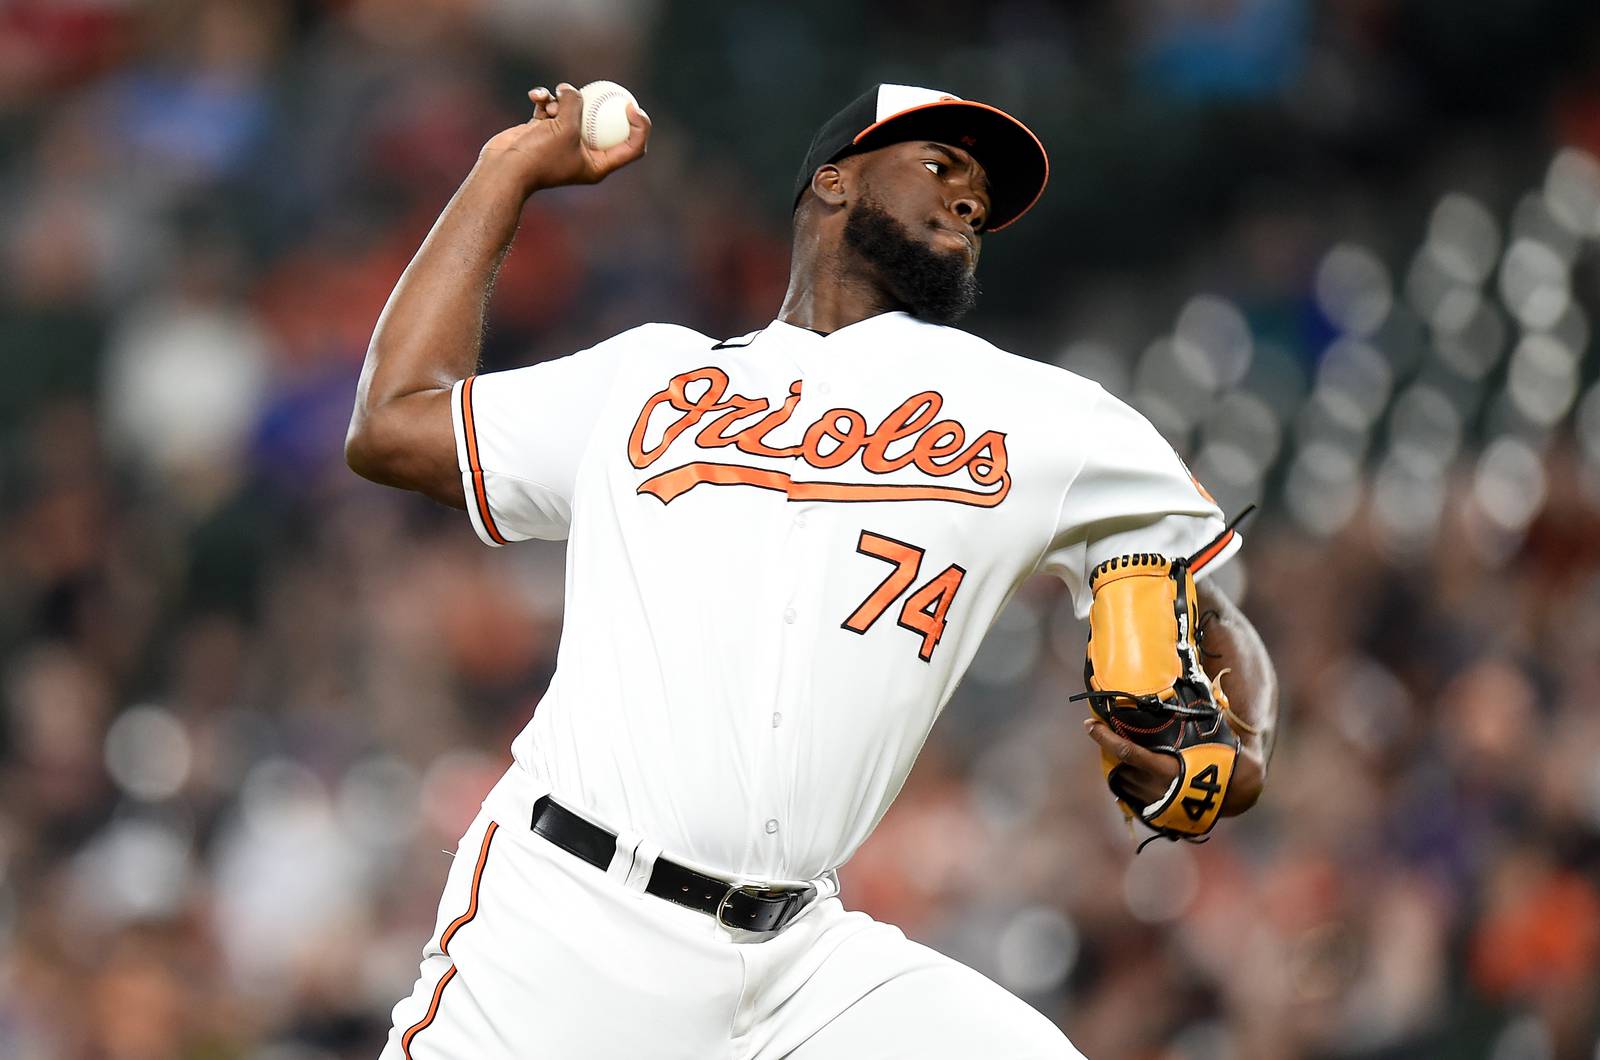 Orioles closer Félix Bautista feels ‘rejuvenated’ and aims for opening